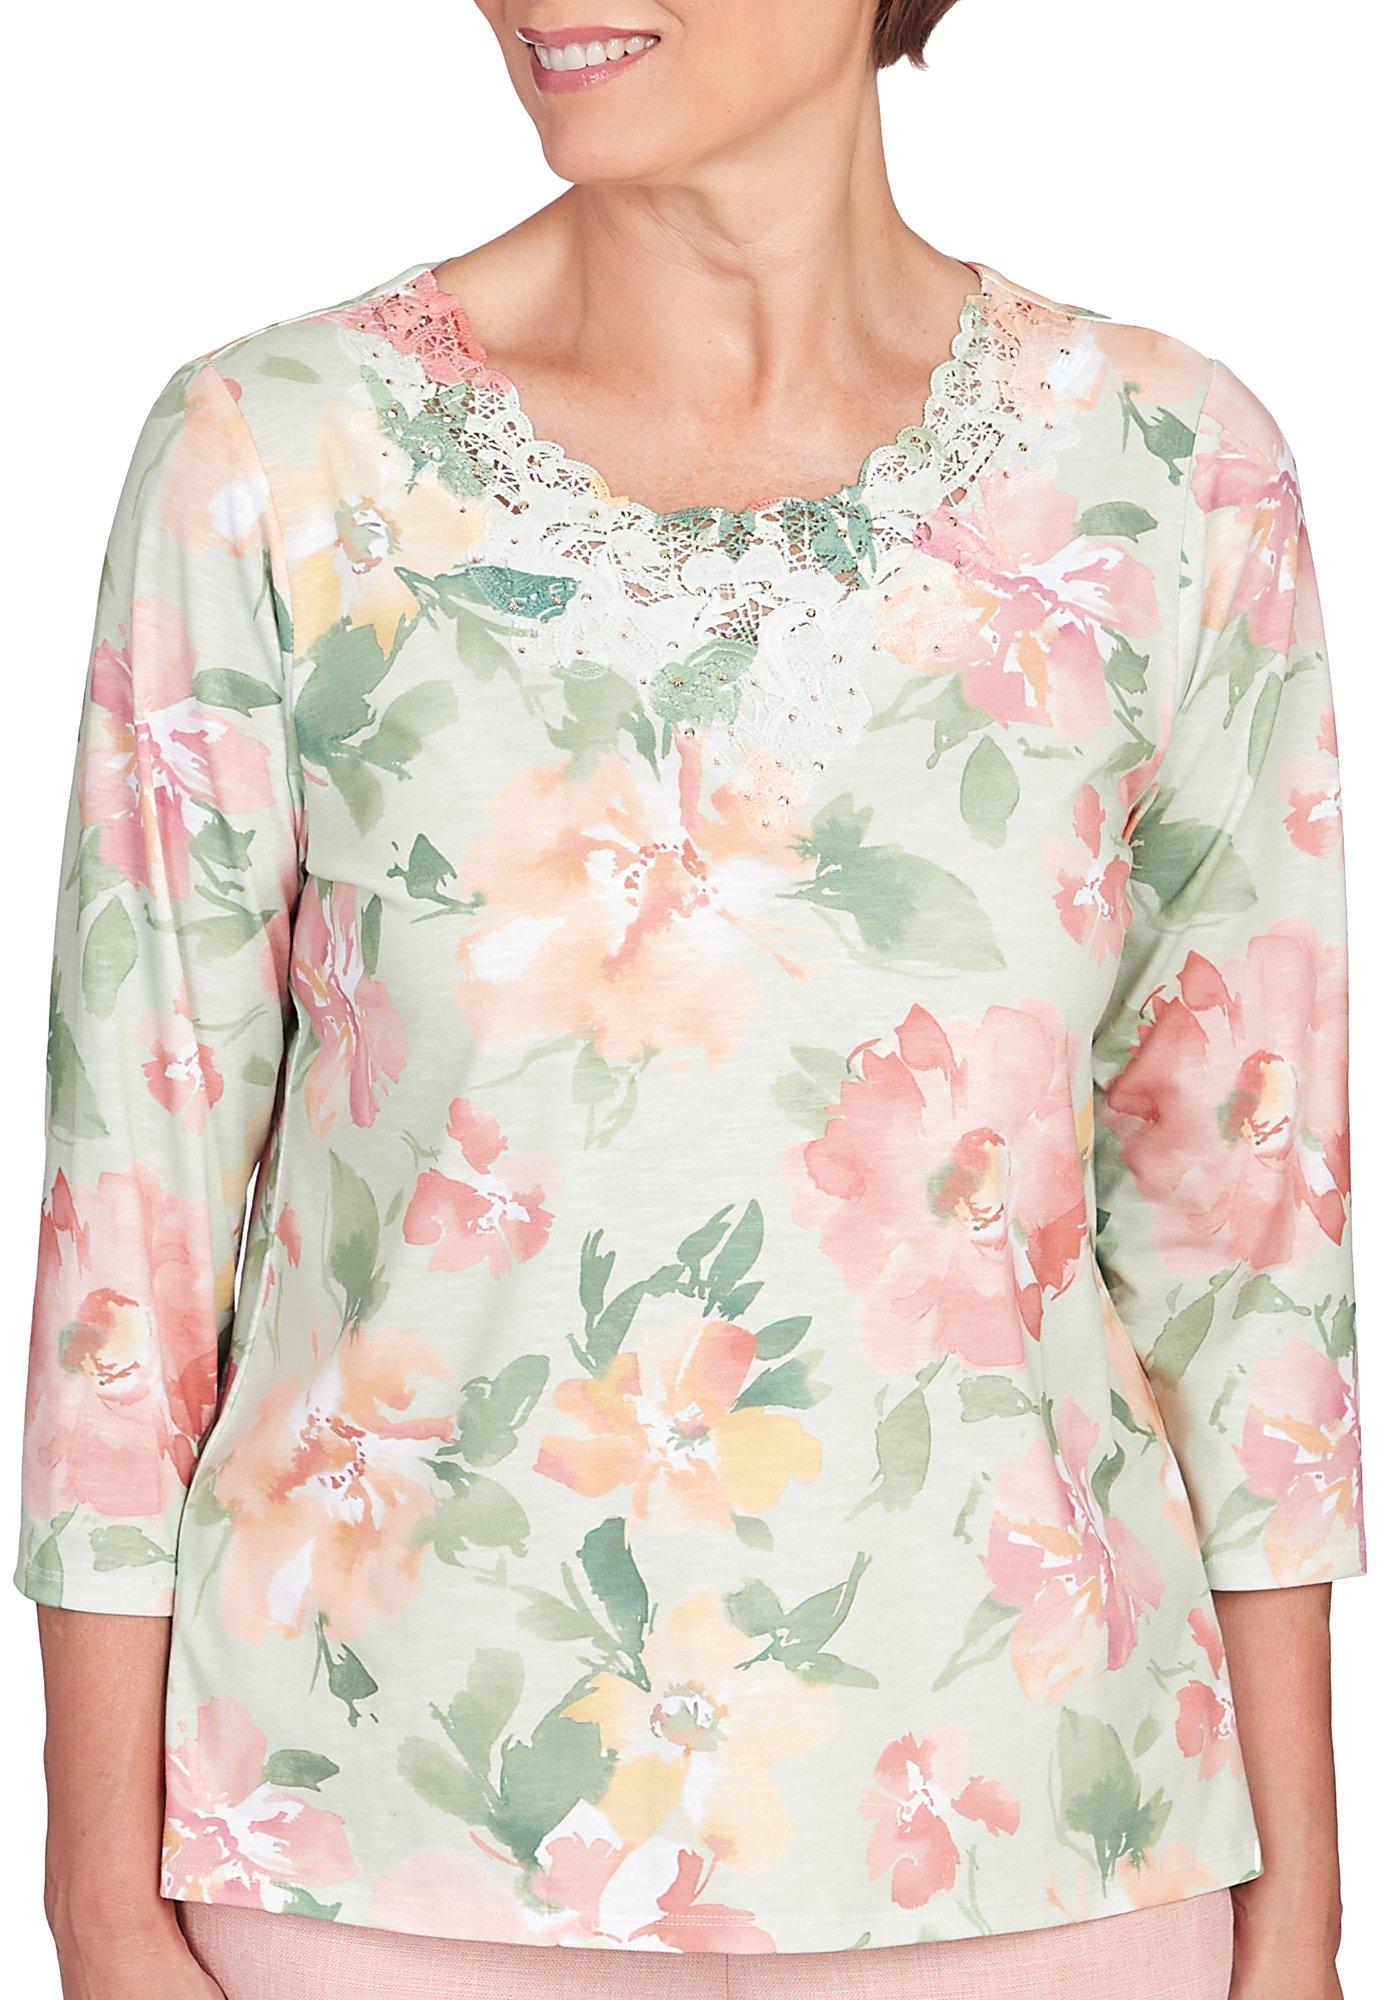 Alfred Dunner Petite Floral Jeweled Lace 3/4 Sleeve Top